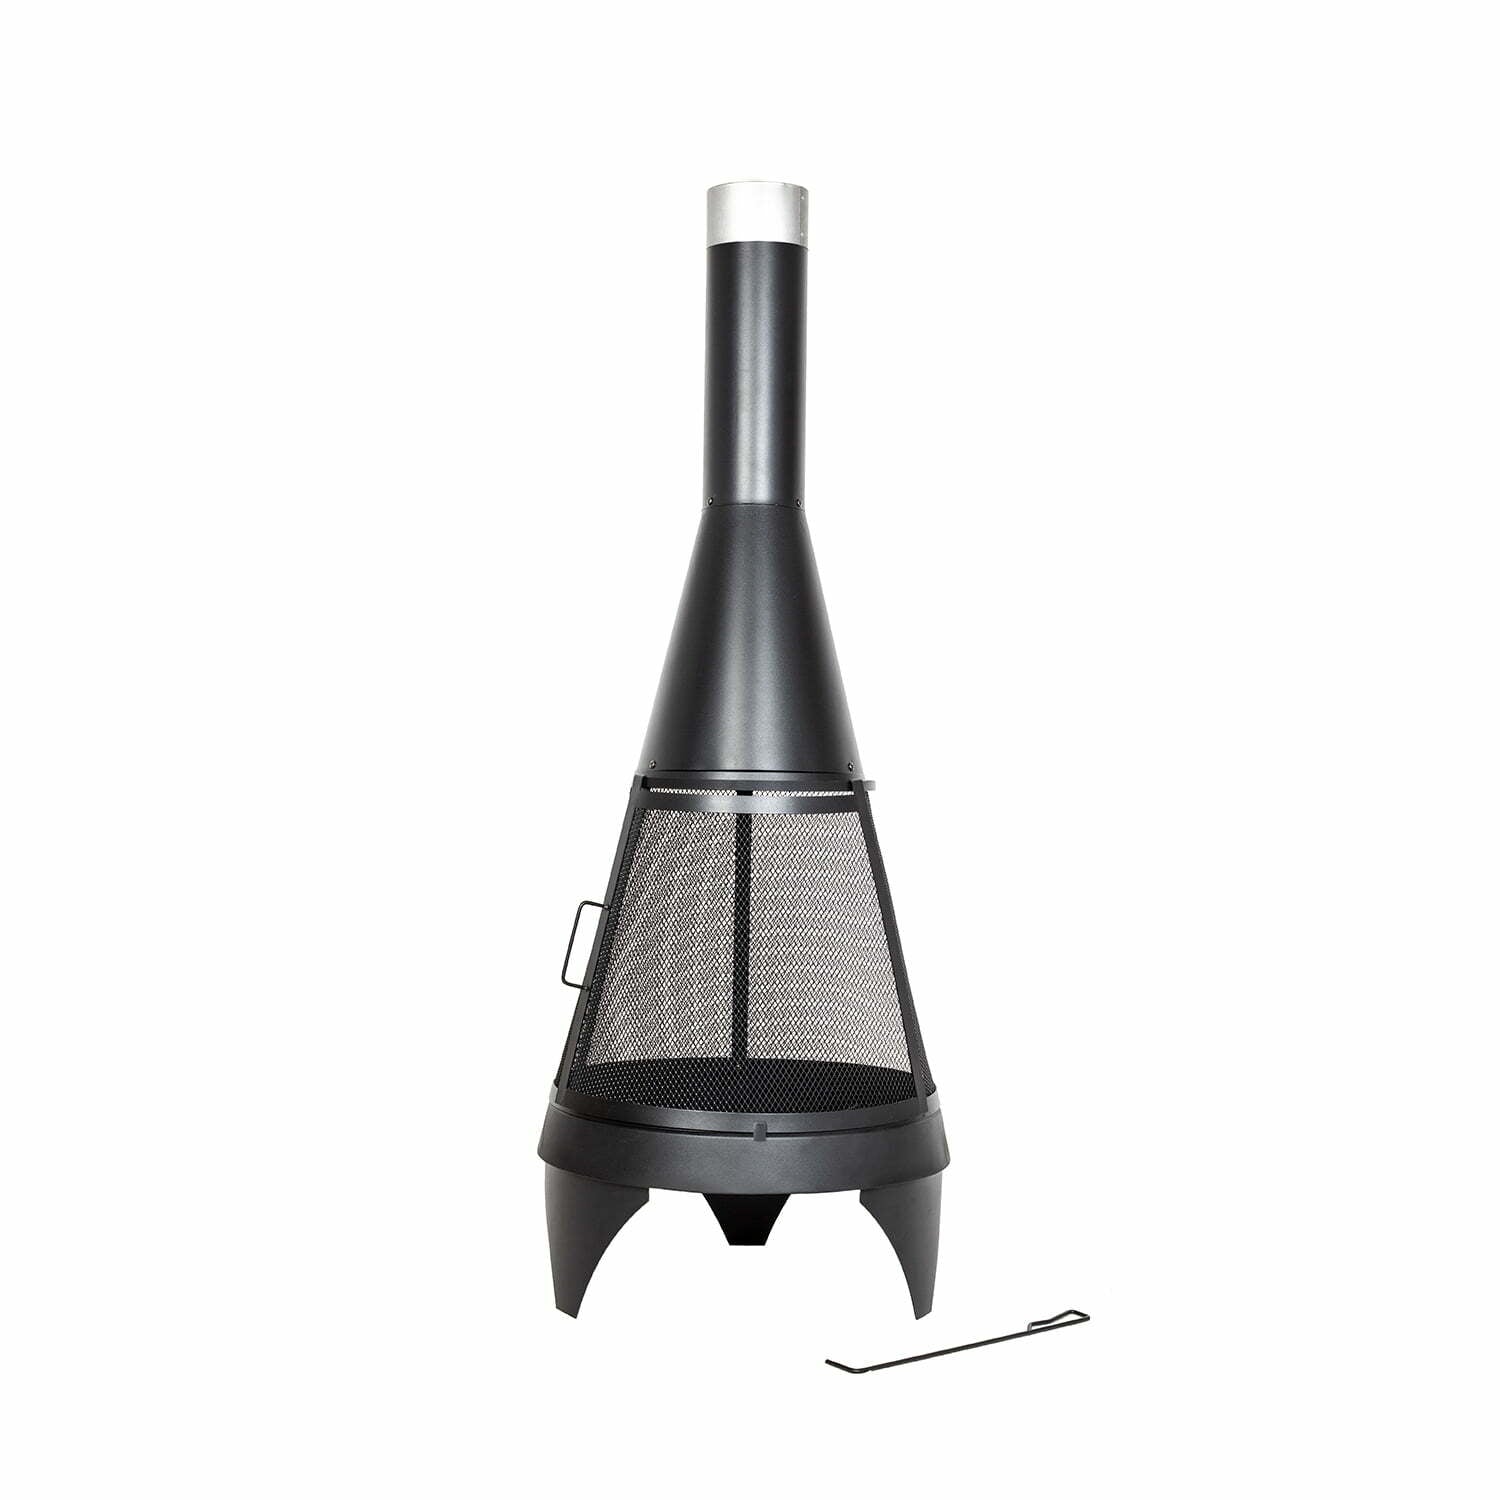 China Large Solid Cast Iron Outdoor Chiminea With Weave Pattern  Manufacturers, Suppliers, Distributor - Factory Direct Price - Gnee Garden